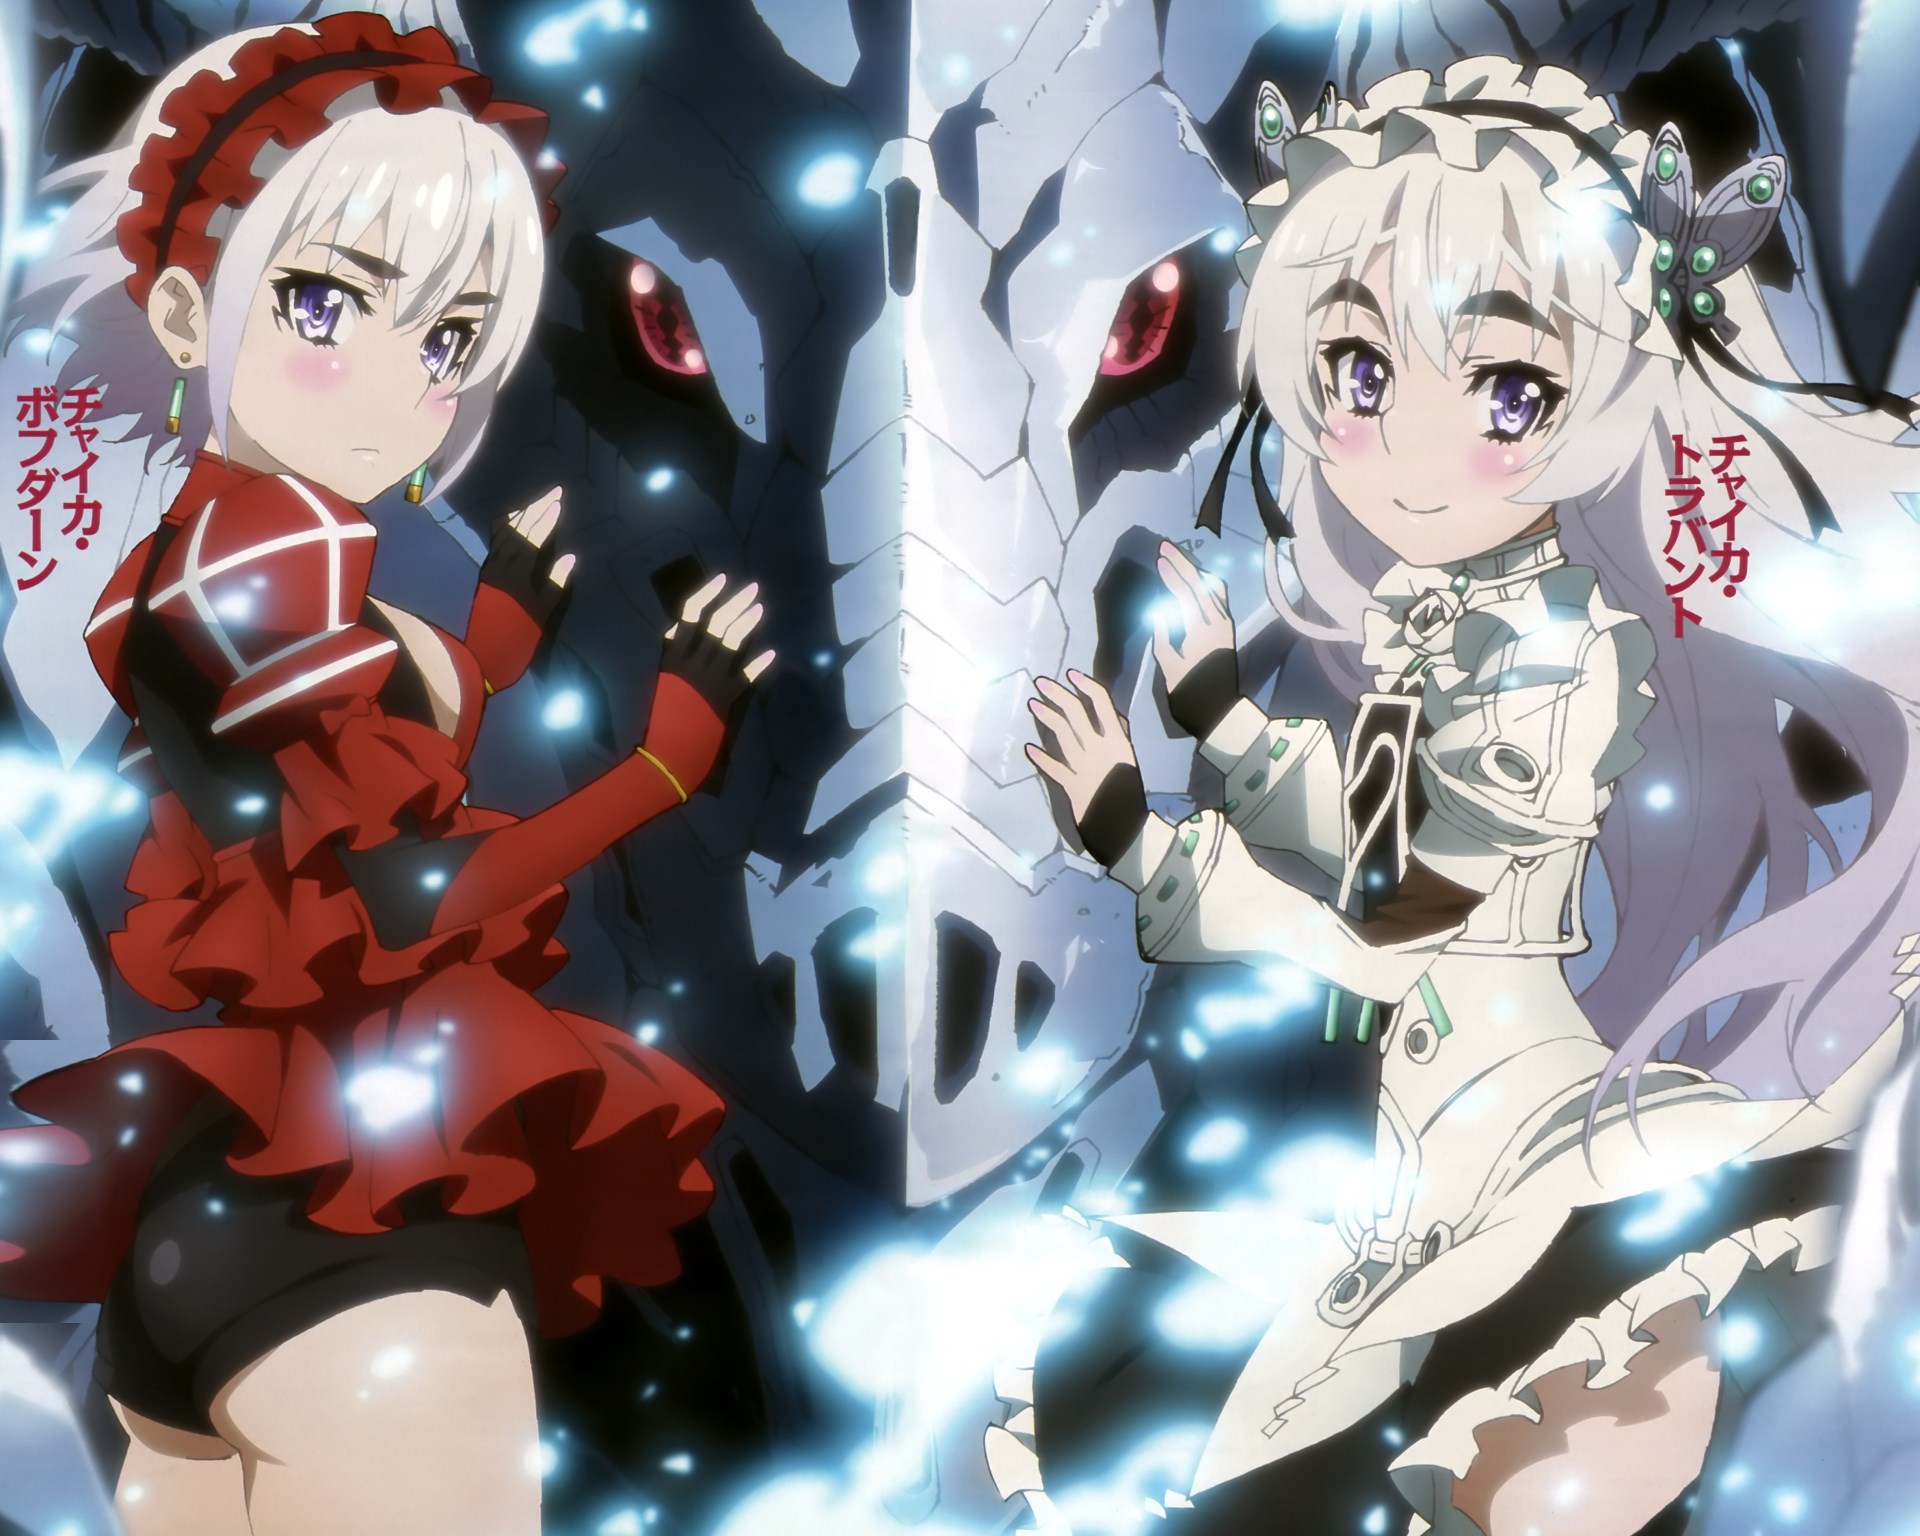 Free Download Chaika The Coffin Princess Wallpaper 16 19 X 1536 Stmednet 19x1536 For Your Desktop Mobile Tablet Explore 50 Chaika Wallpaper Chaika Wallpaper